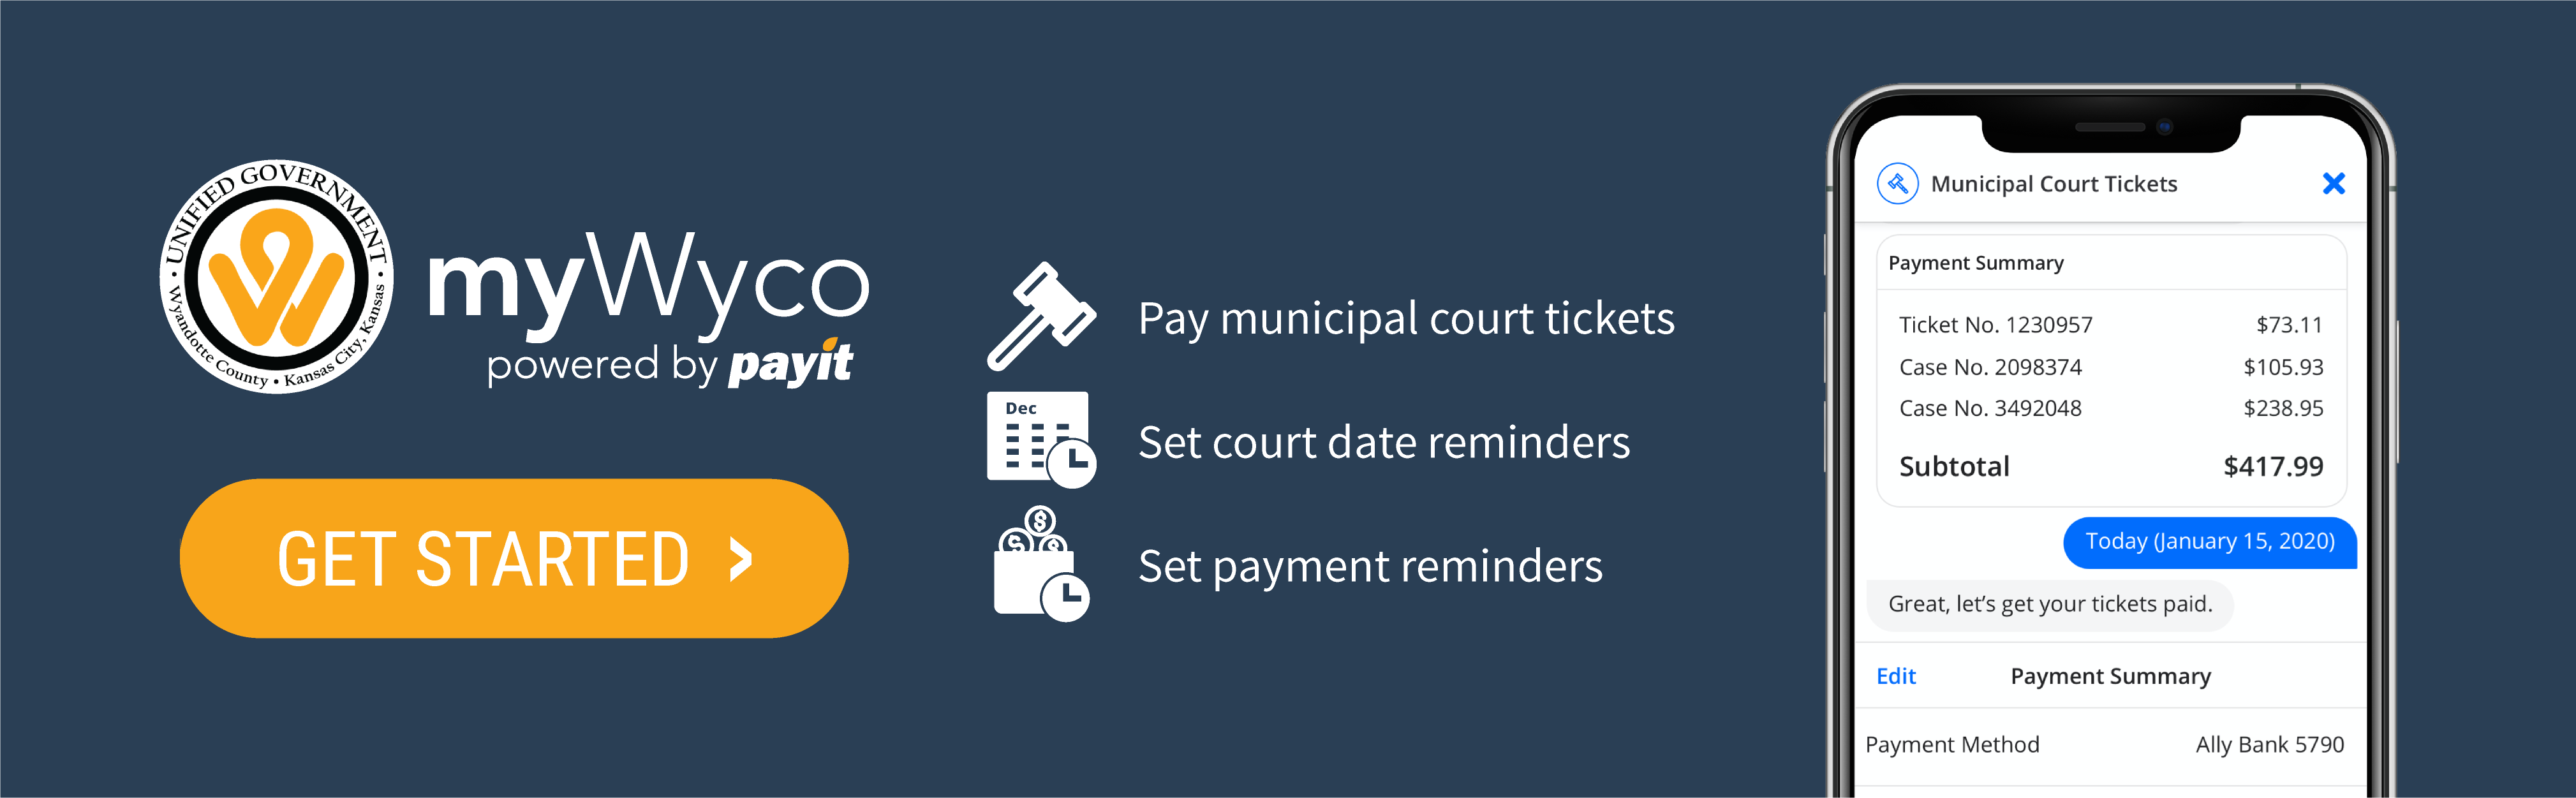 myWyco app Pay Court Tickets picture